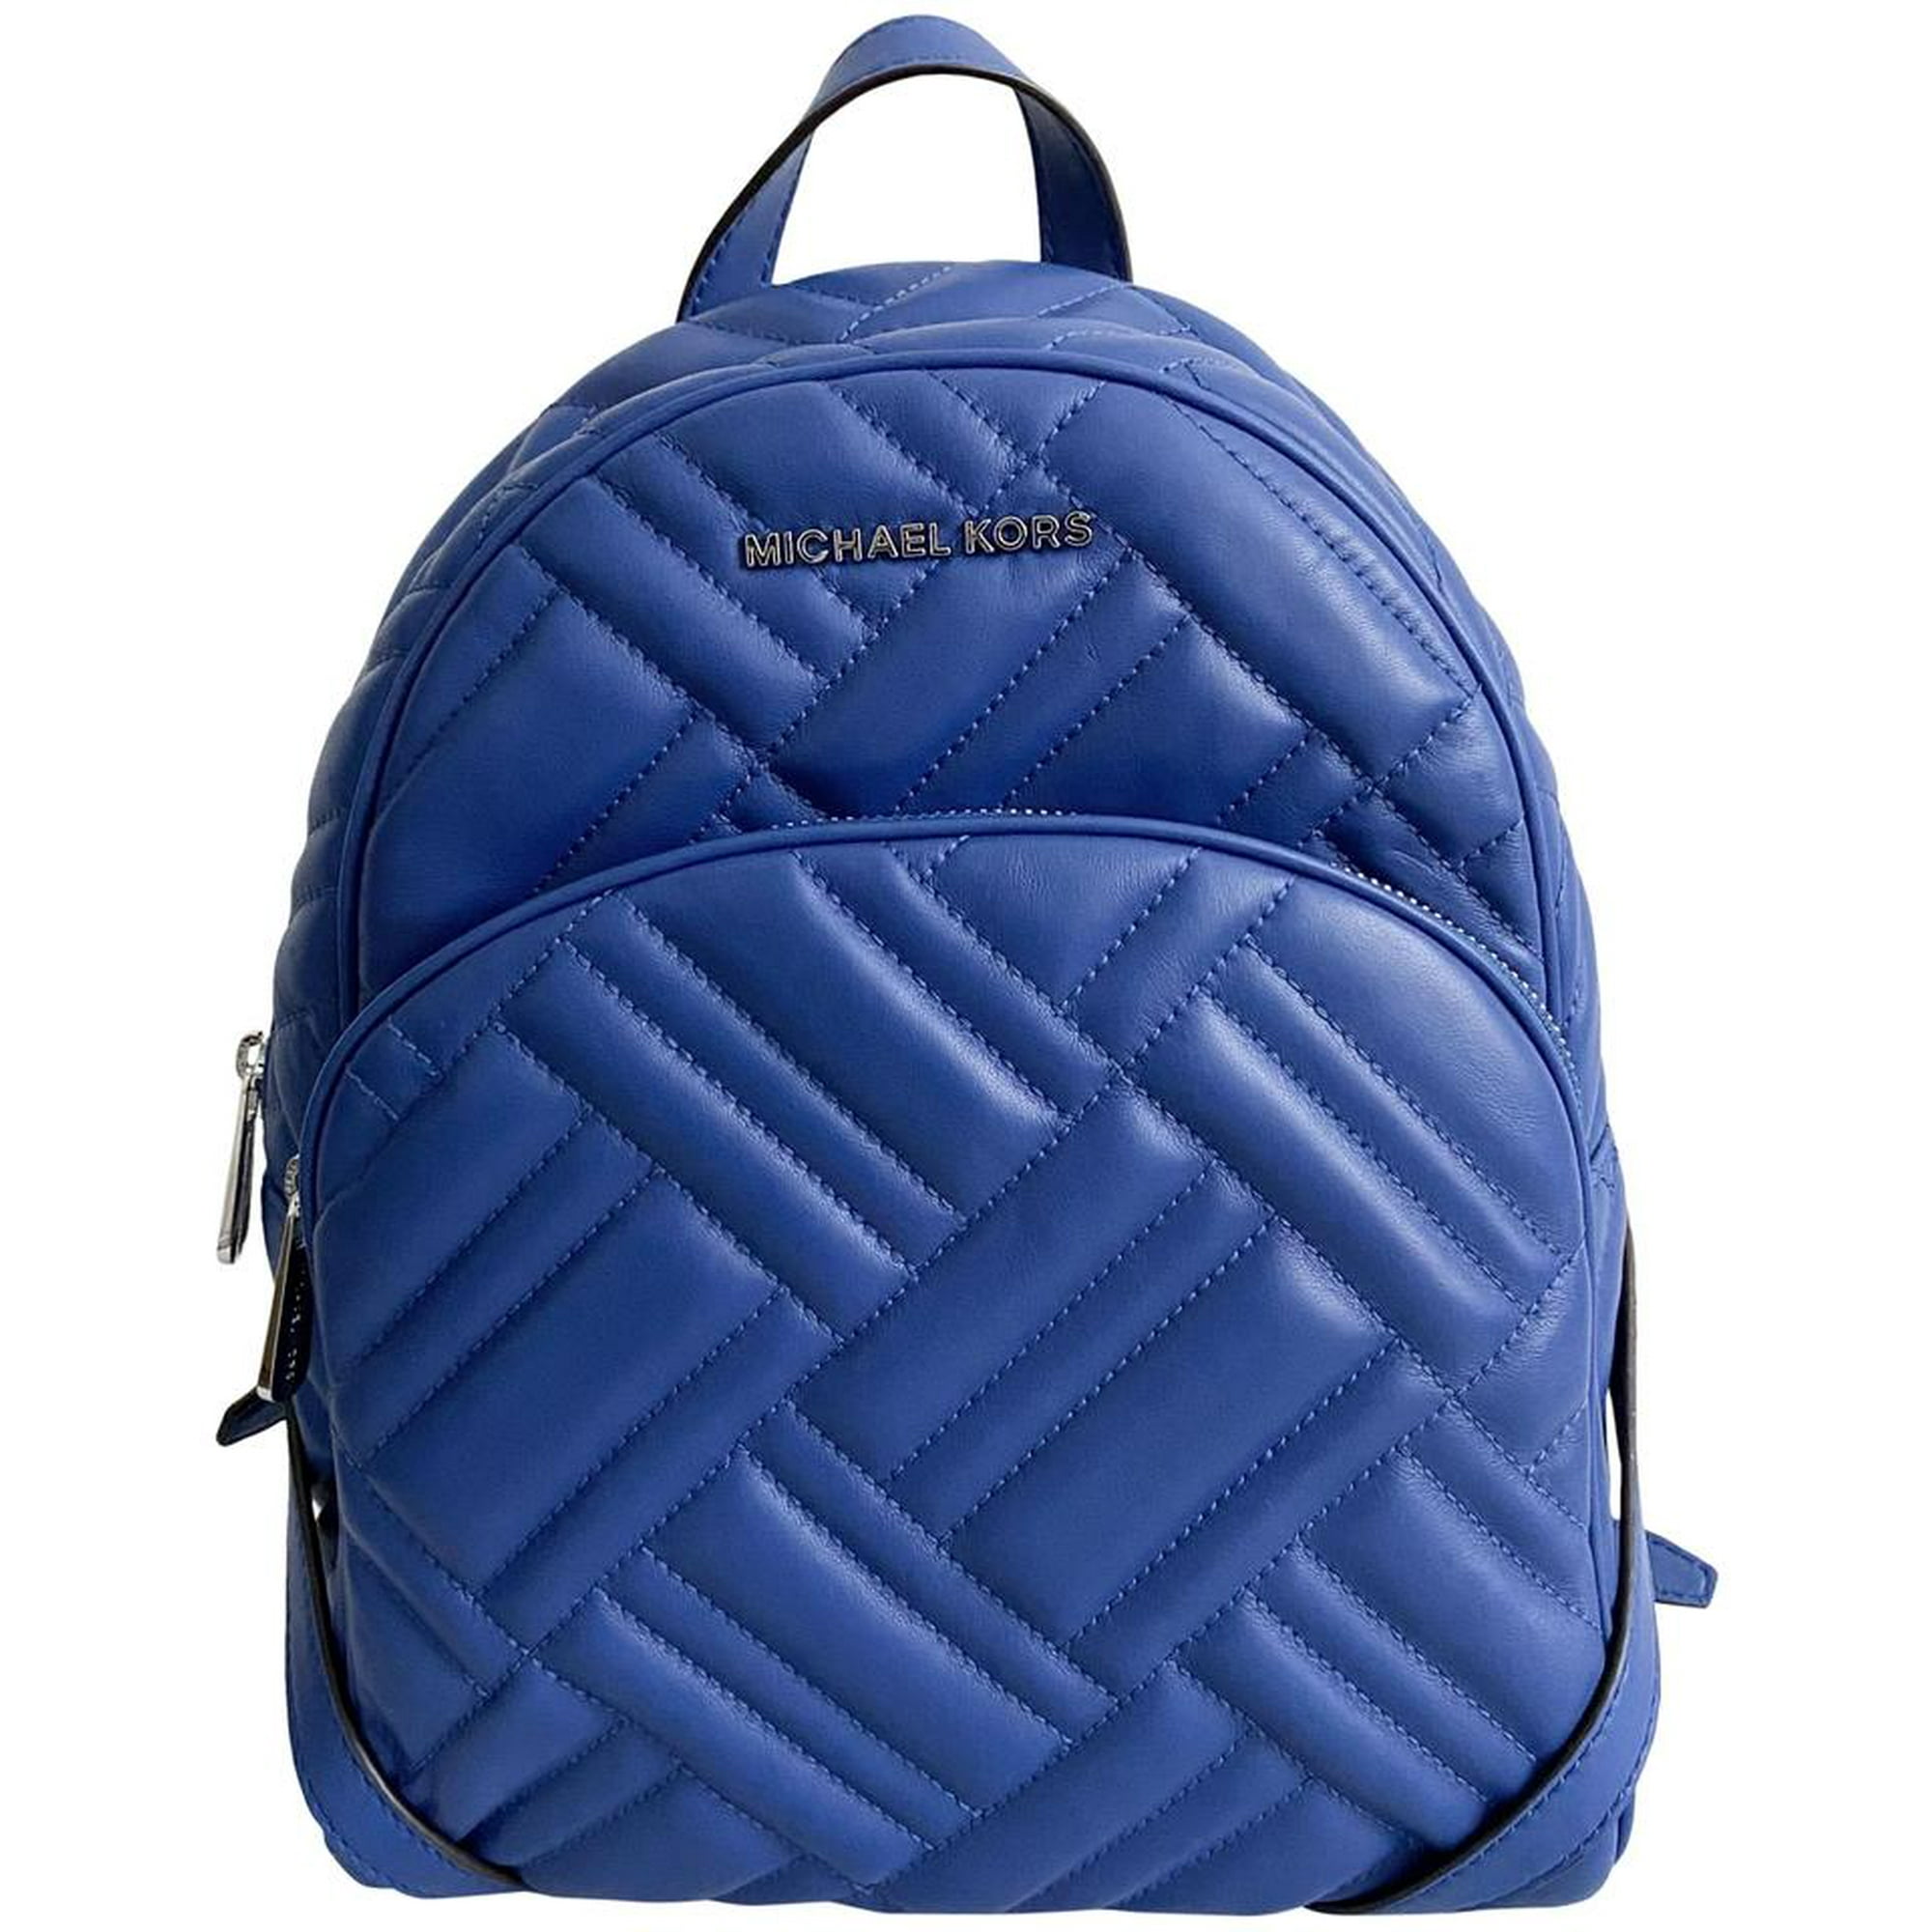 Arriba 99+ imagen michael kors abbey mini quilted backpack - Abzlocal.mx